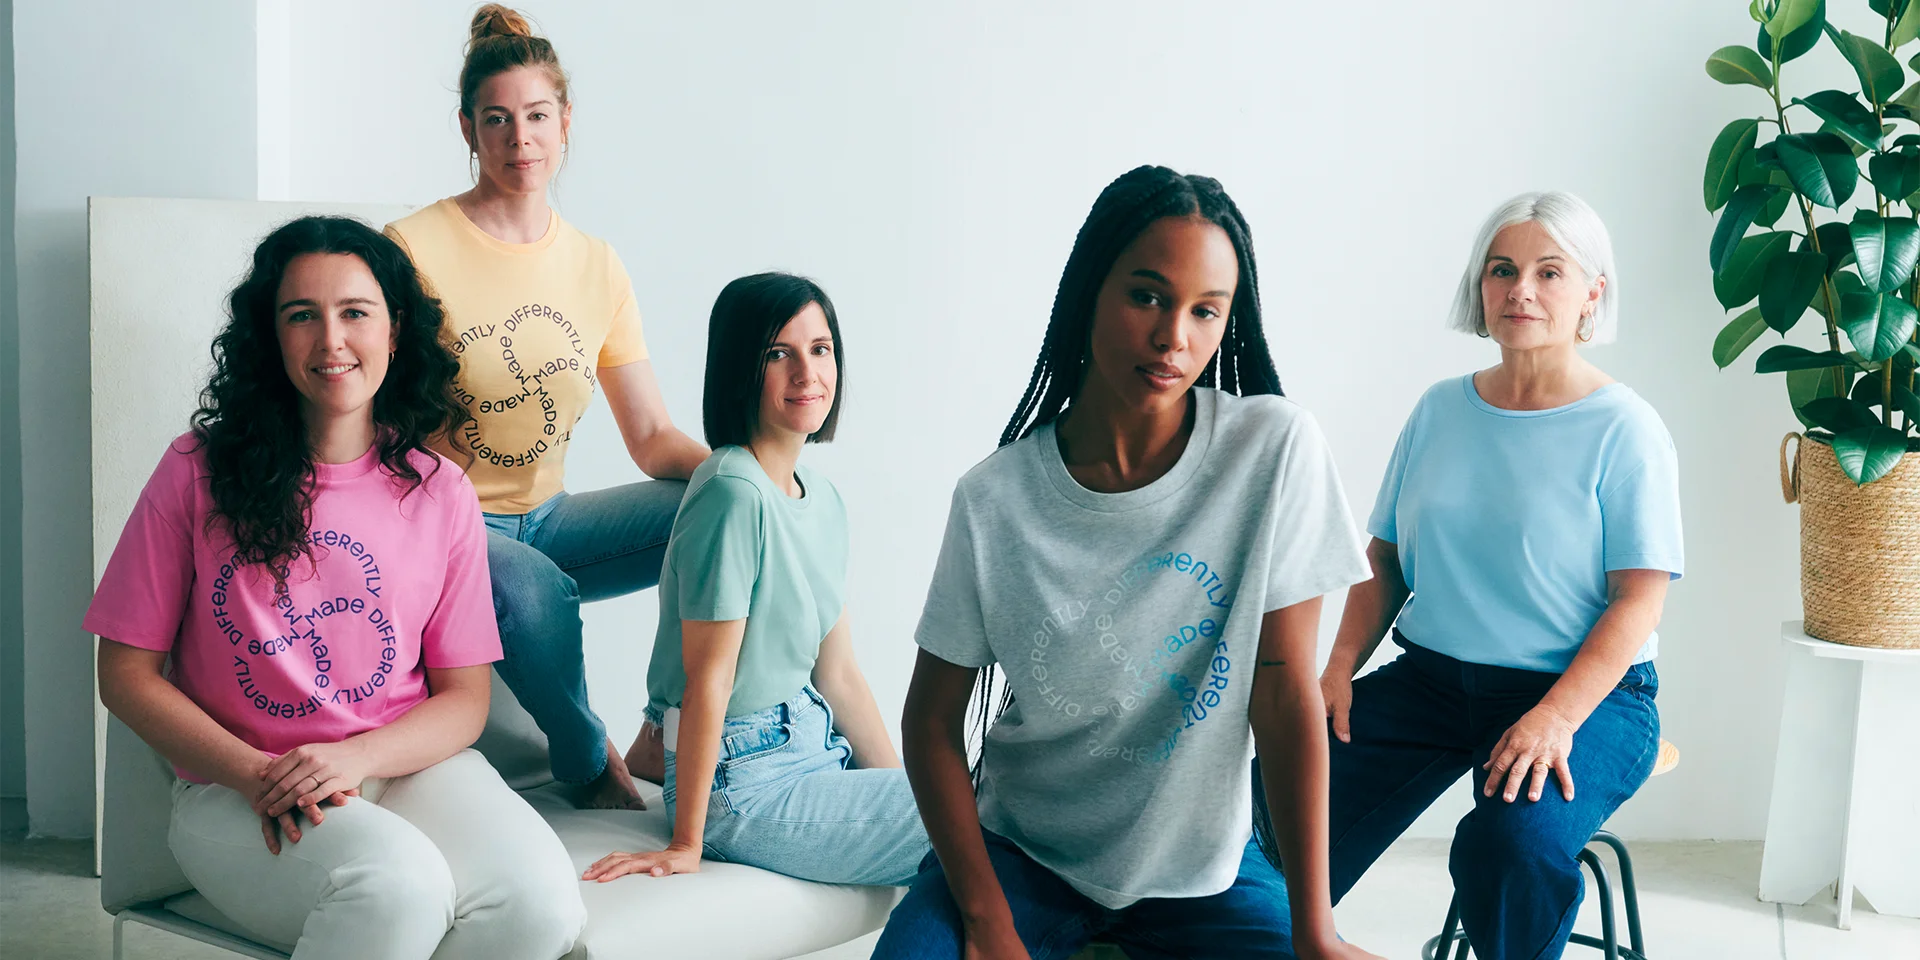 five women sat smiling together and wearing matching t-shirt styles in a variety of pastel shades